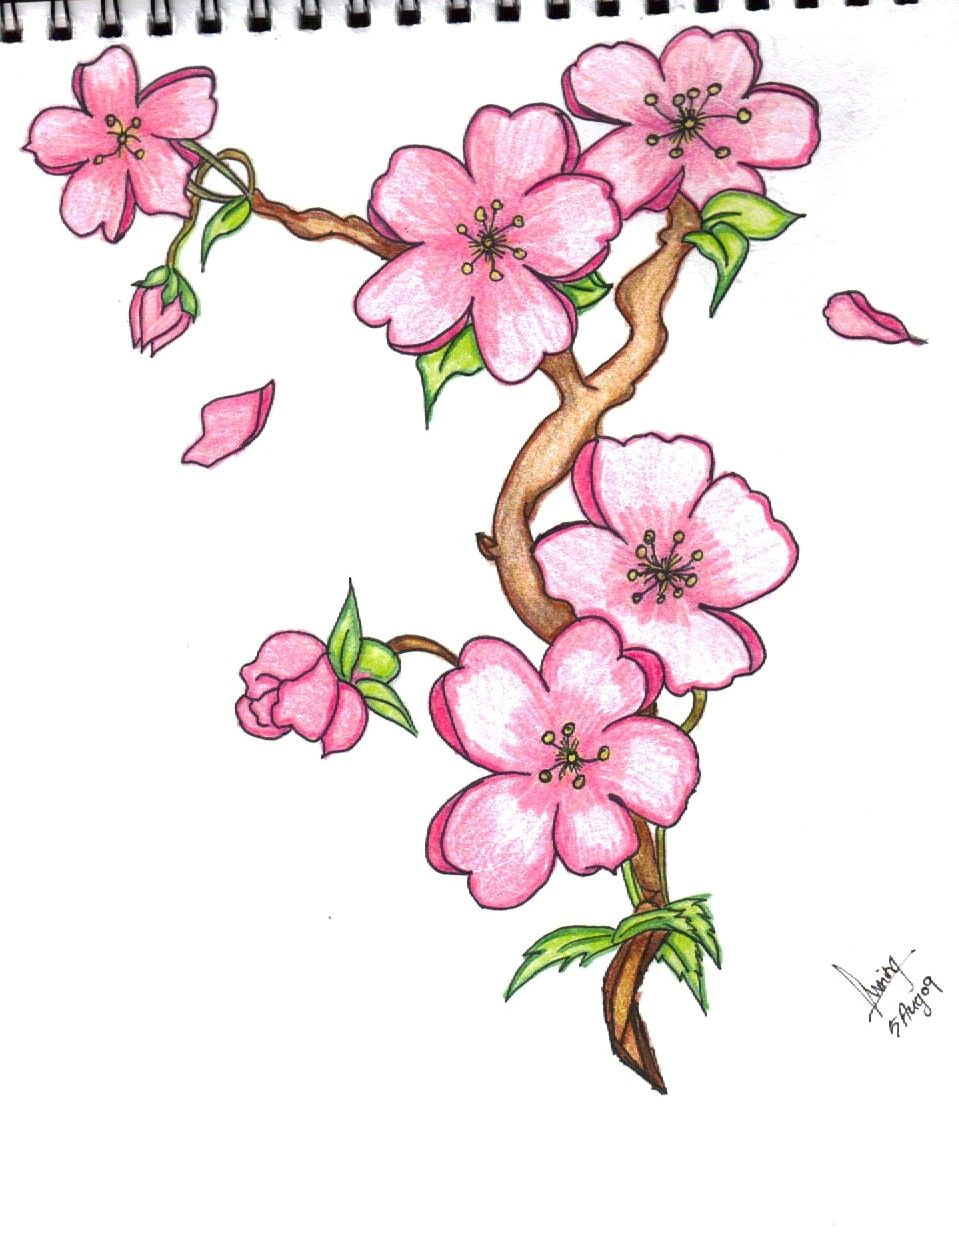 Drawing Of Flower Bucket Pin by Marvin todd On Drawing Flowers In 2019 Pinterest Drawings